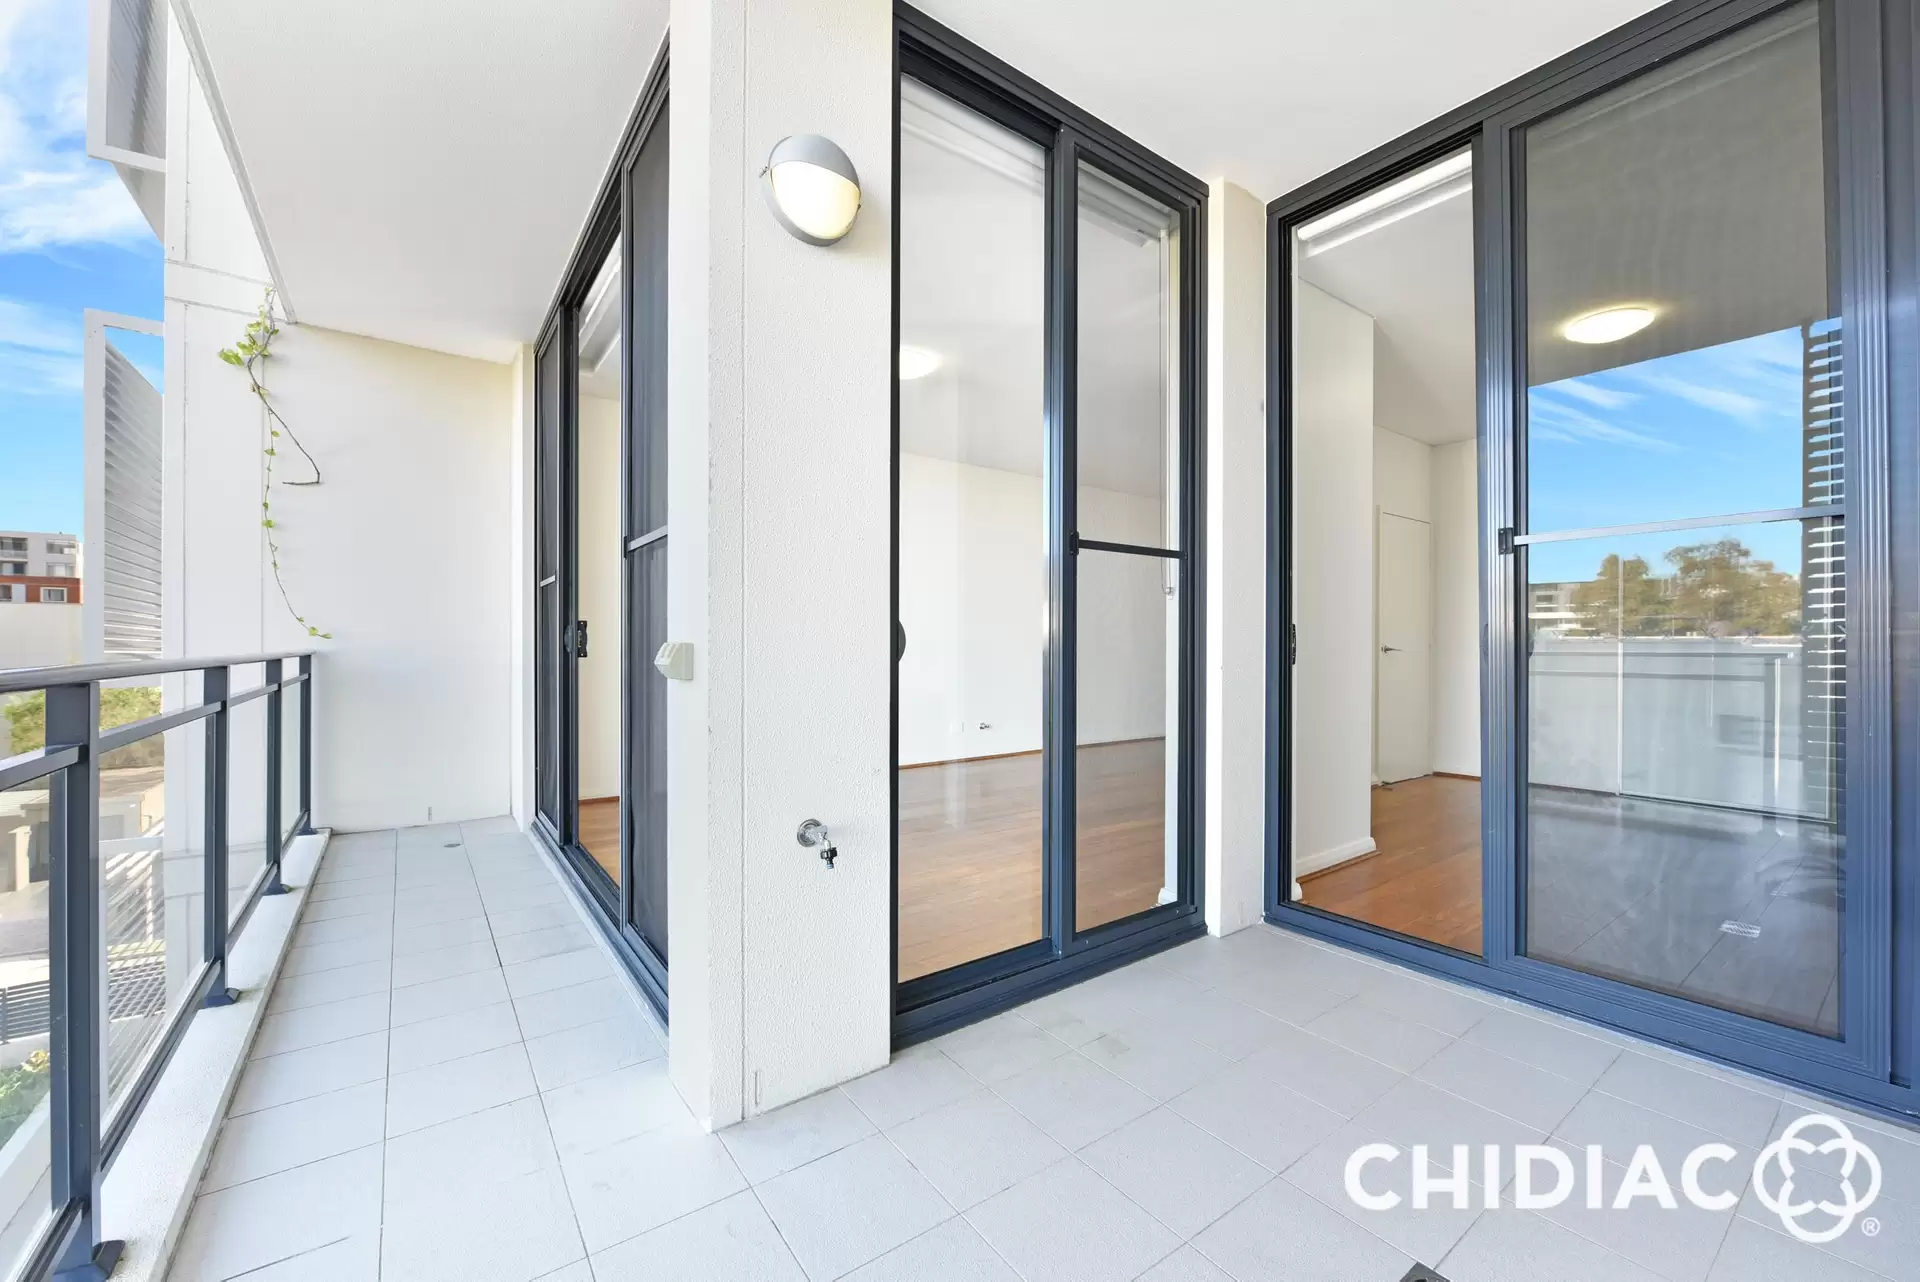 402/16 Corniche Drive, Wentworth Point Leased by Chidiac Realty - image 1